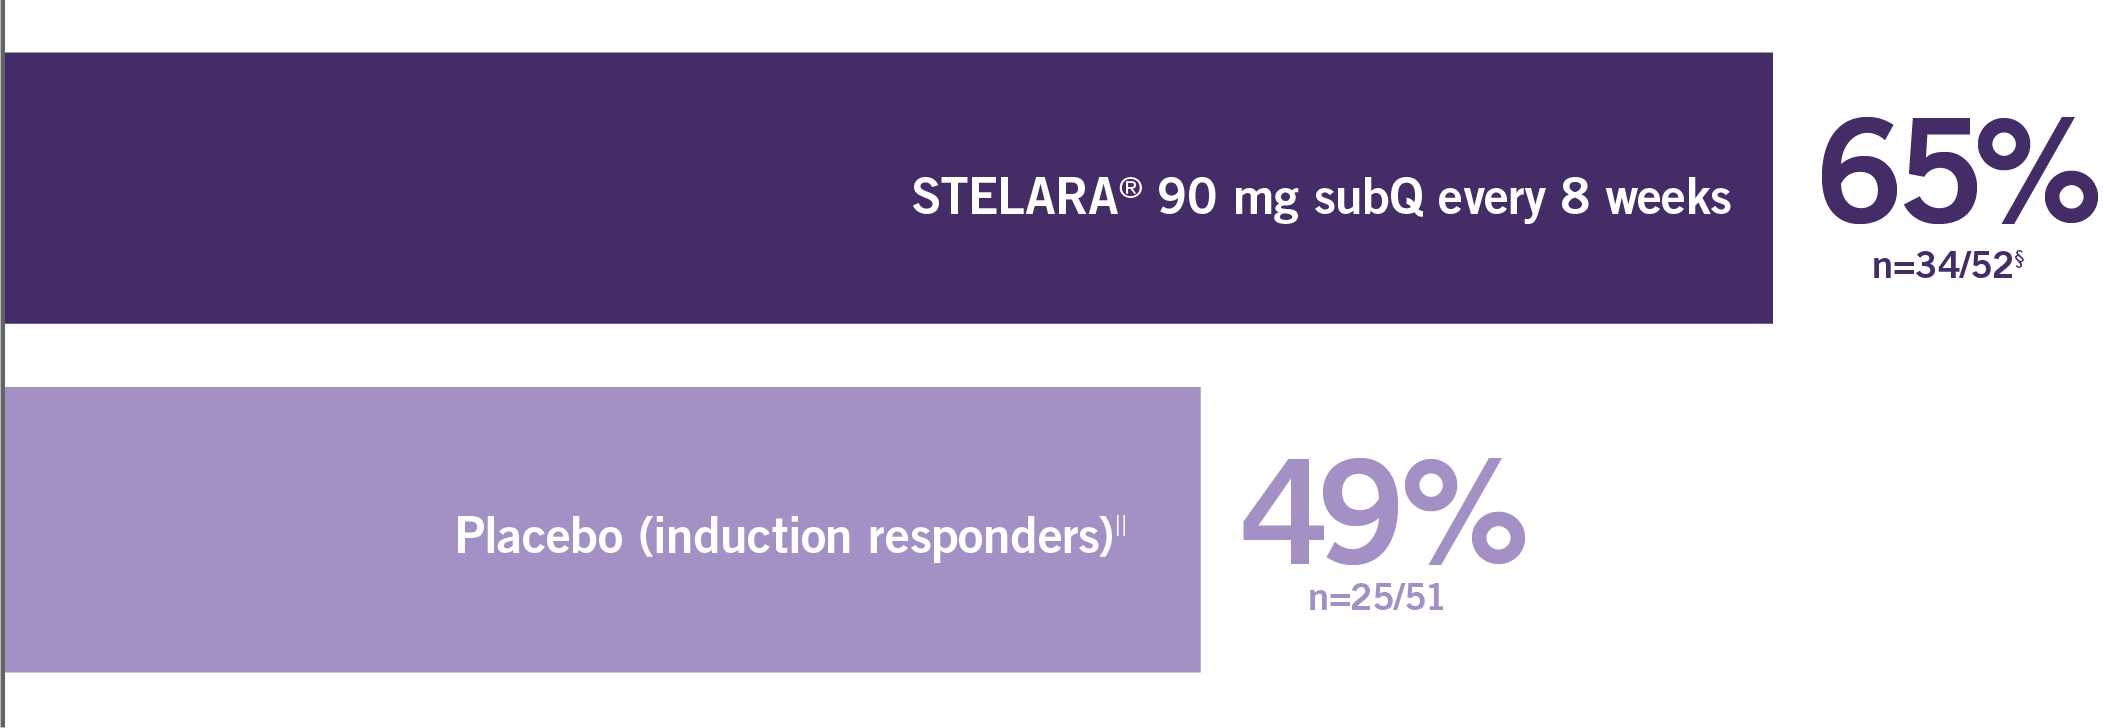 Other endpoint data of clinical remission in TNF Blocker–naïve Subgroup at 1 year after induction between patients taking STELARA® and placebo